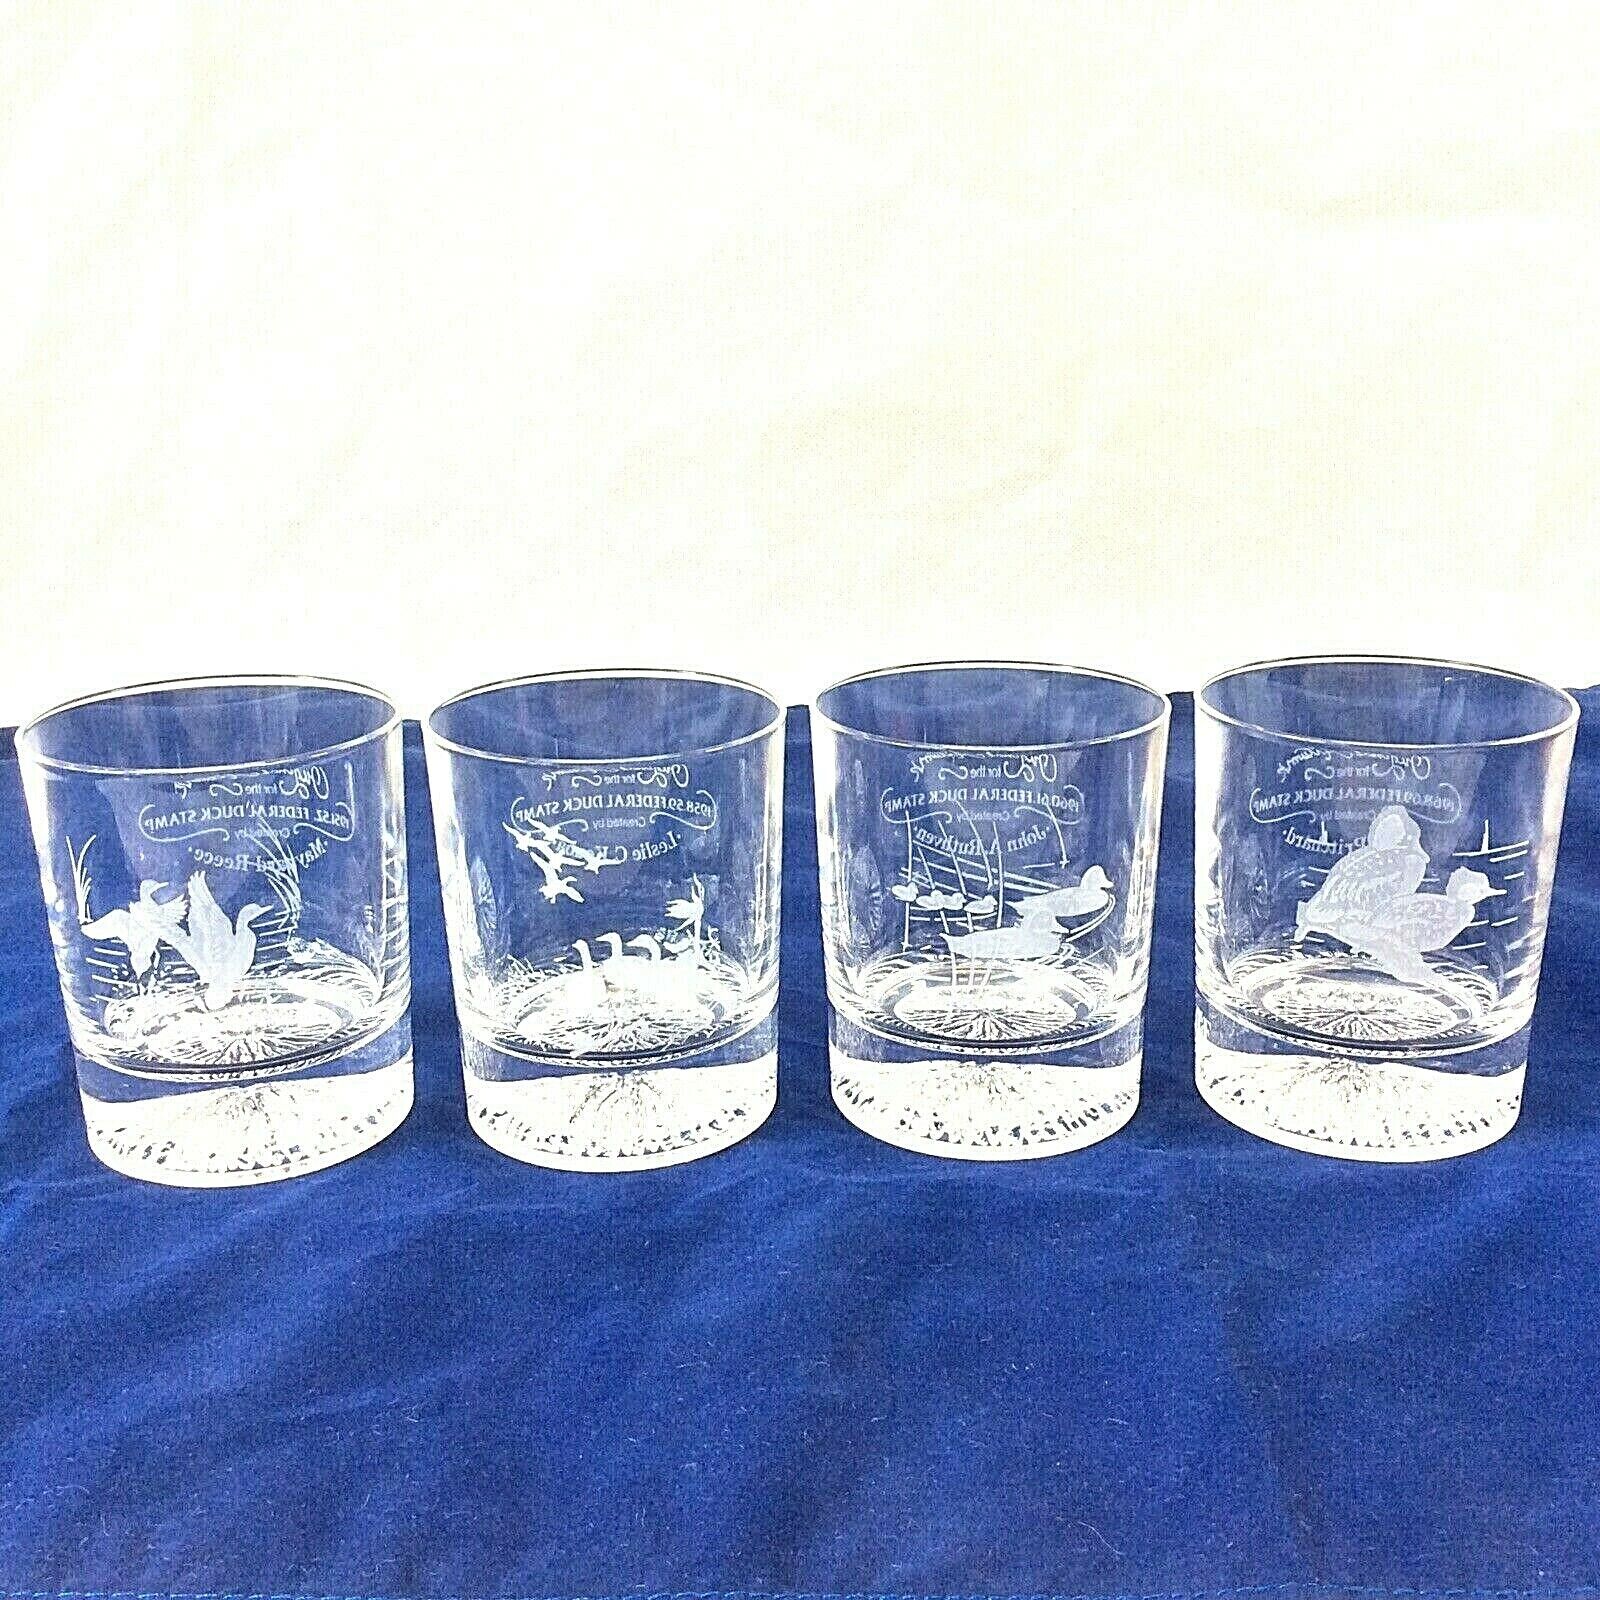 ABERCROMBIE & FITCH ETCHED DUCK DRINKING GLASSES ART OF FEDERAL DUCK STAMPS